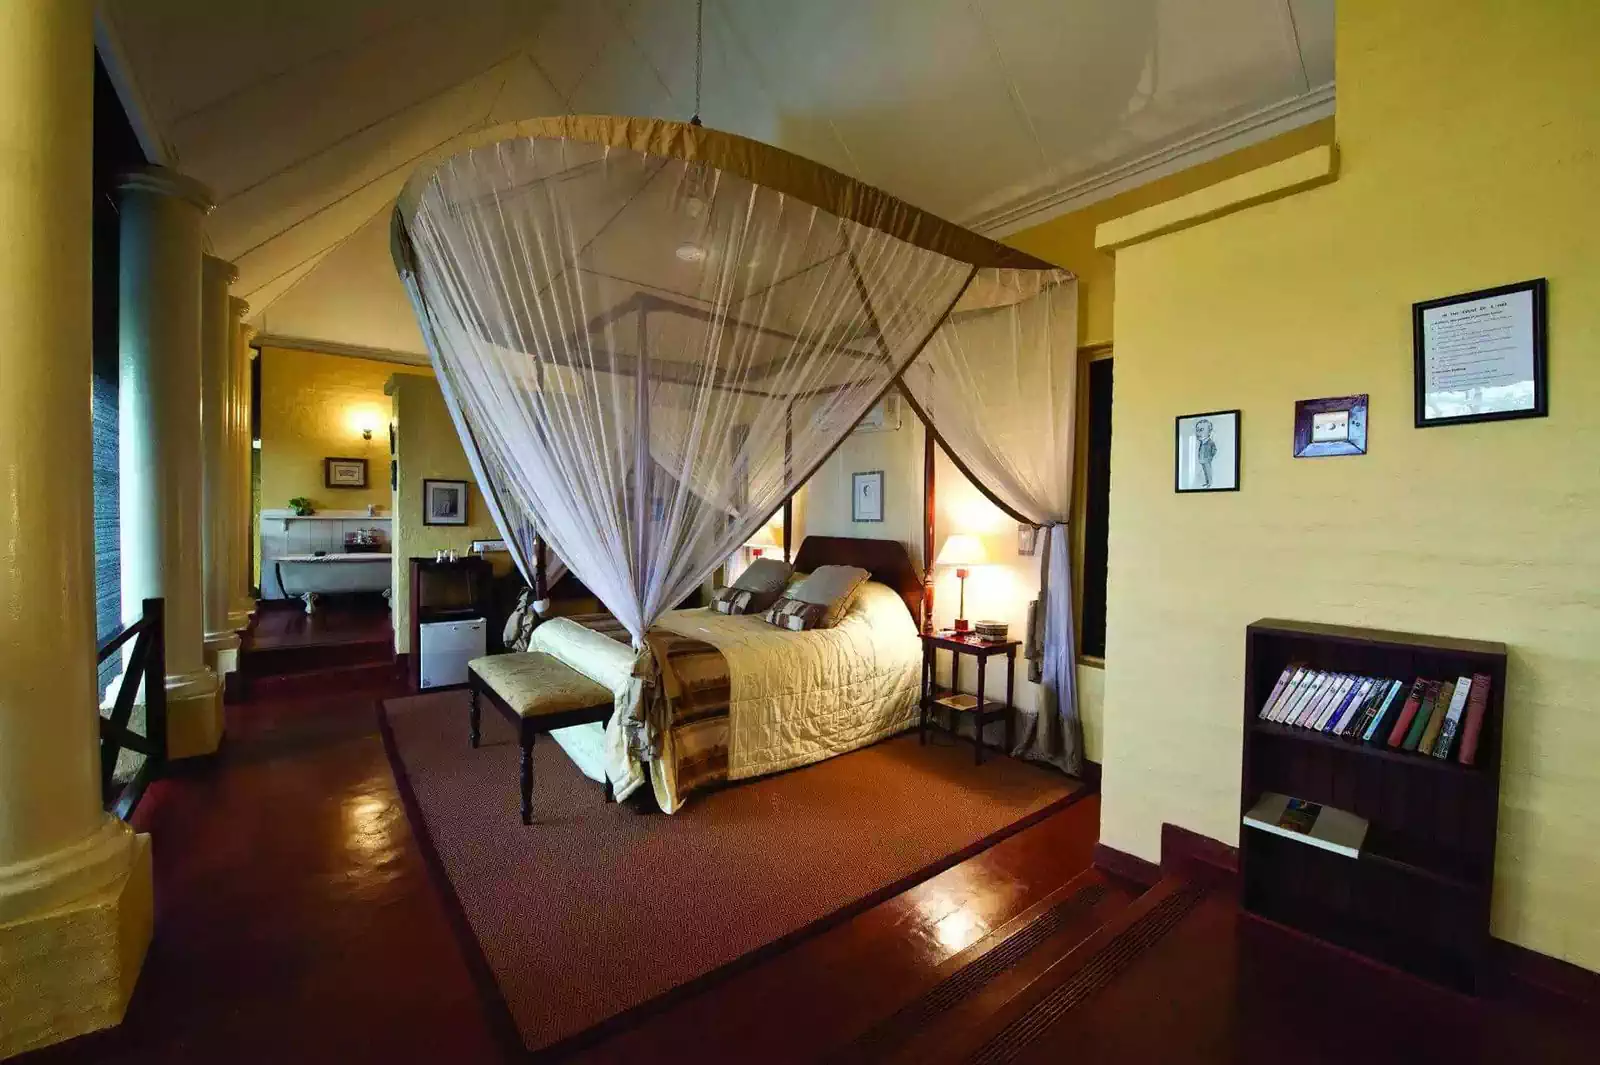 Luxurious colonial look lodge bedroom in Zambian lodge designed by architect 